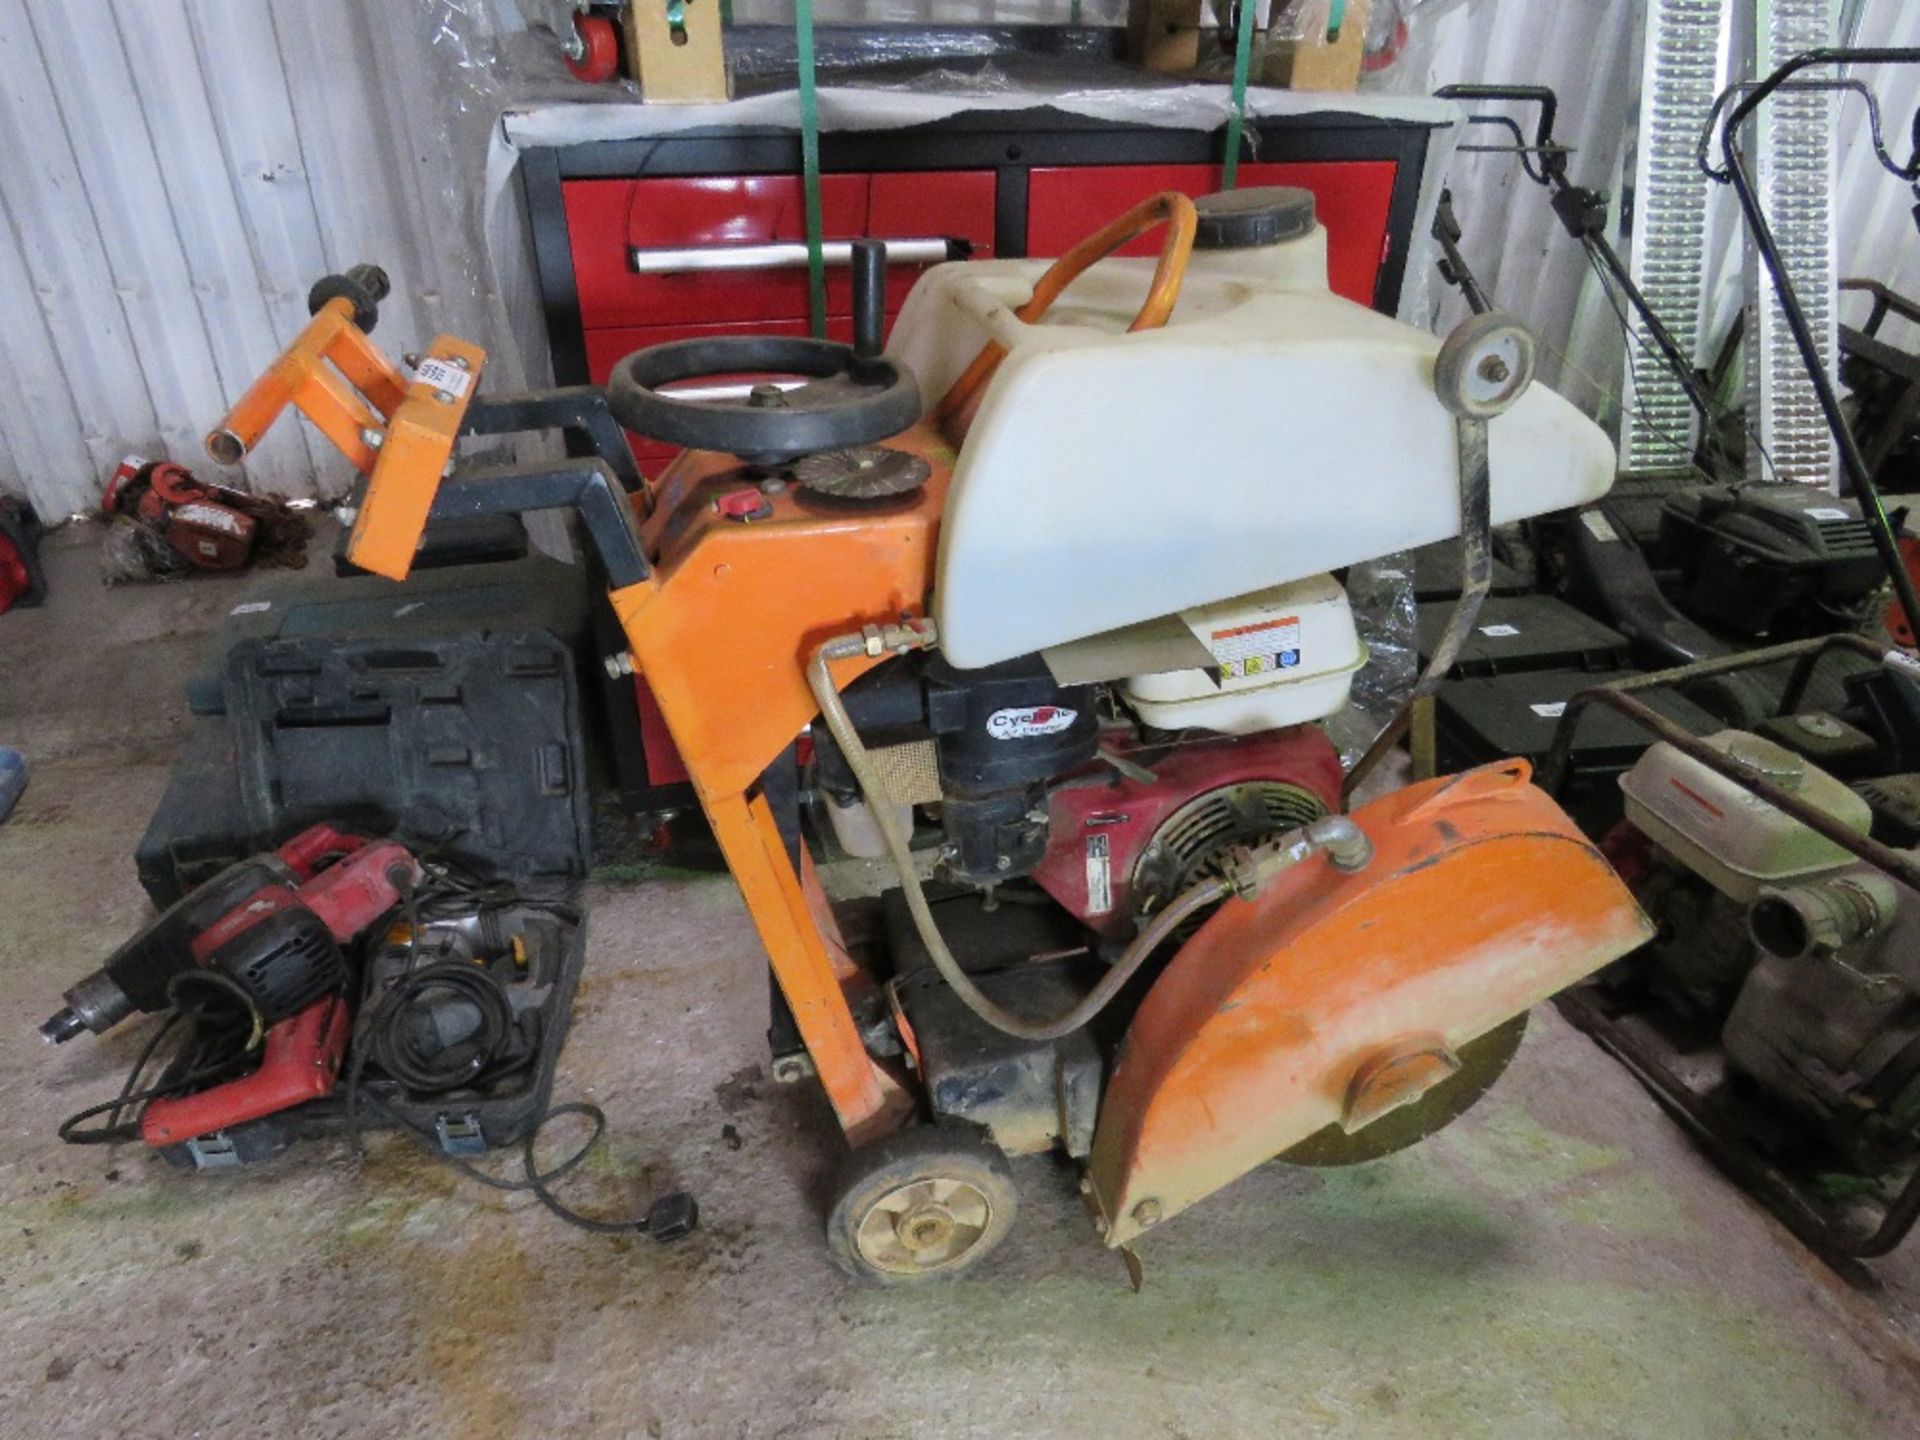 CLIPPER PETROL ENGINED FLOOR SAW WITH TANK AND BLADE. THIS LOT IS SOLD UNDER THE AUCTIONEERS MARGIN